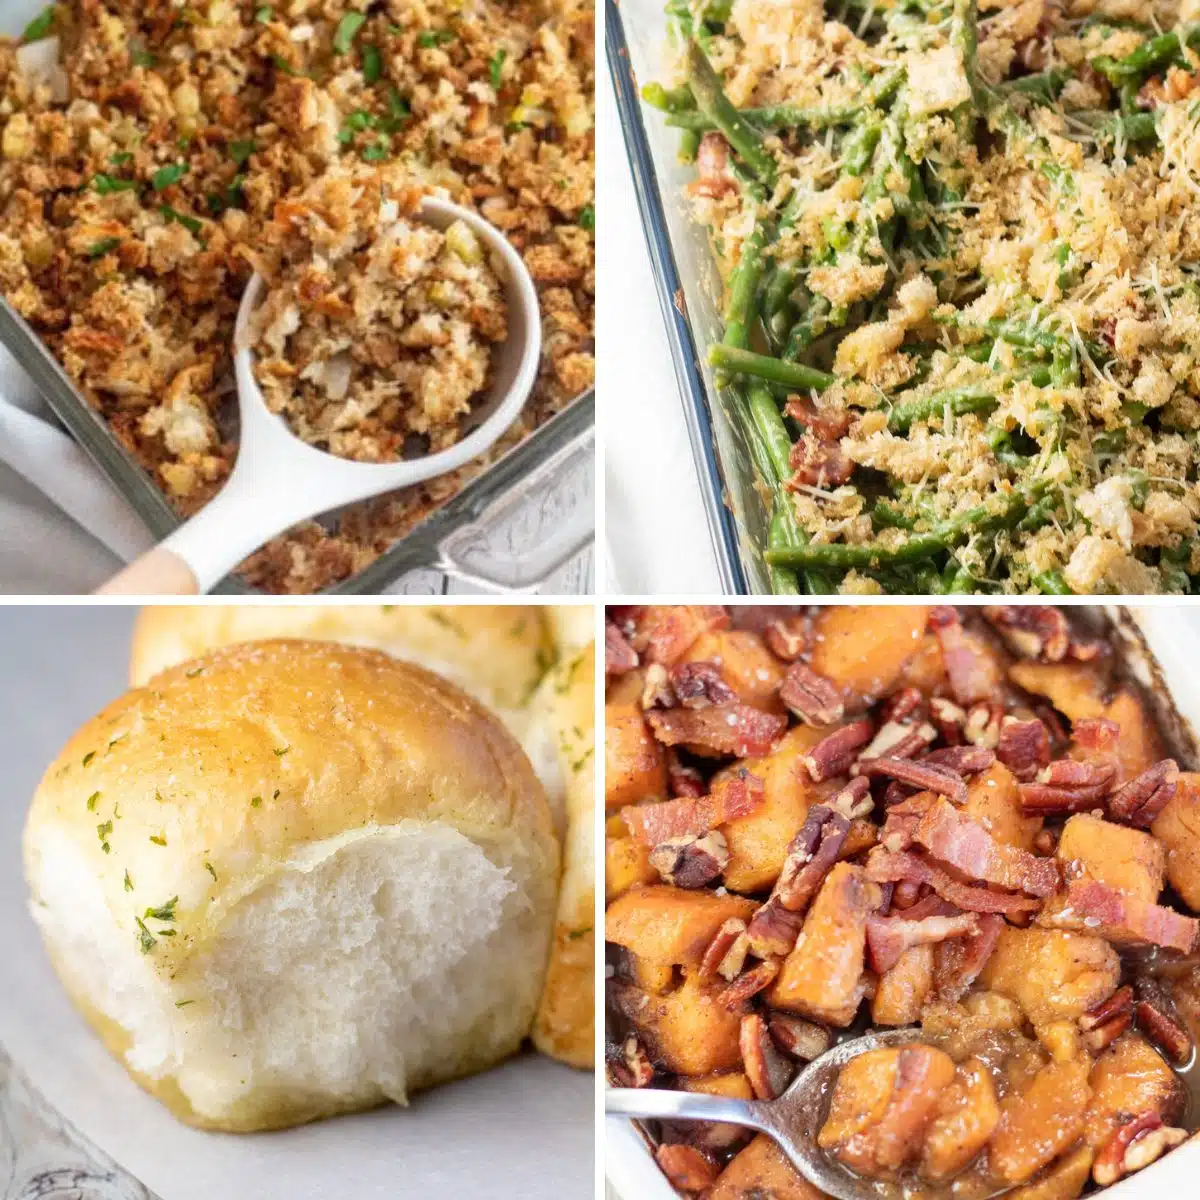 Square split image showing different recipes that can be served on Thanksgiving with turkey.